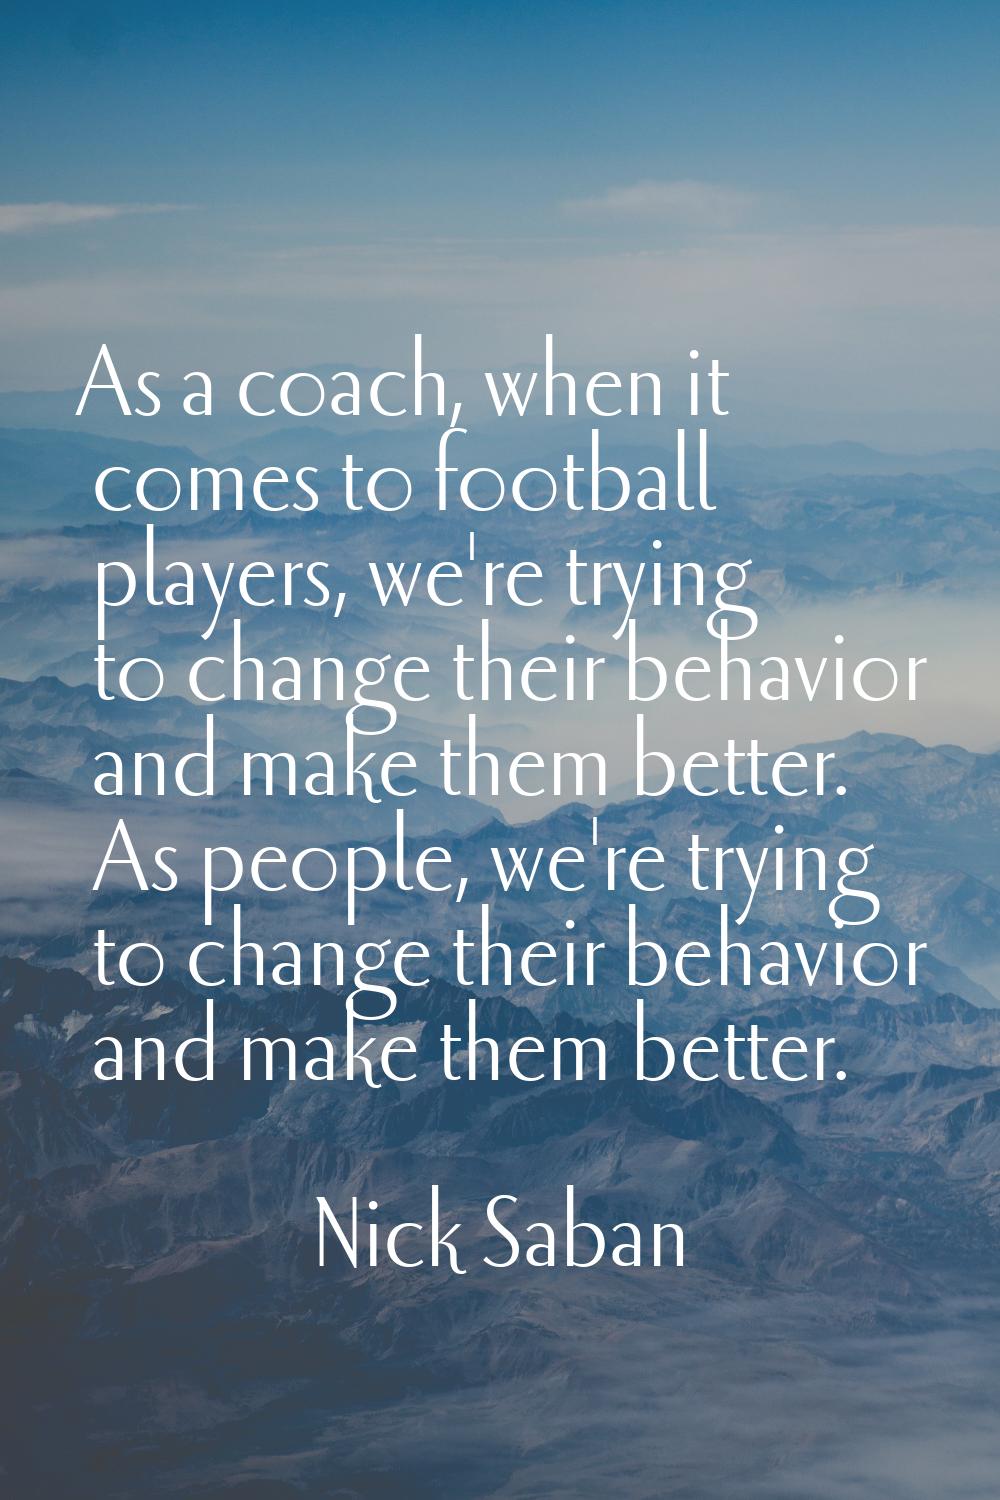 As a coach, when it comes to football players, we're trying to change their behavior and make them 